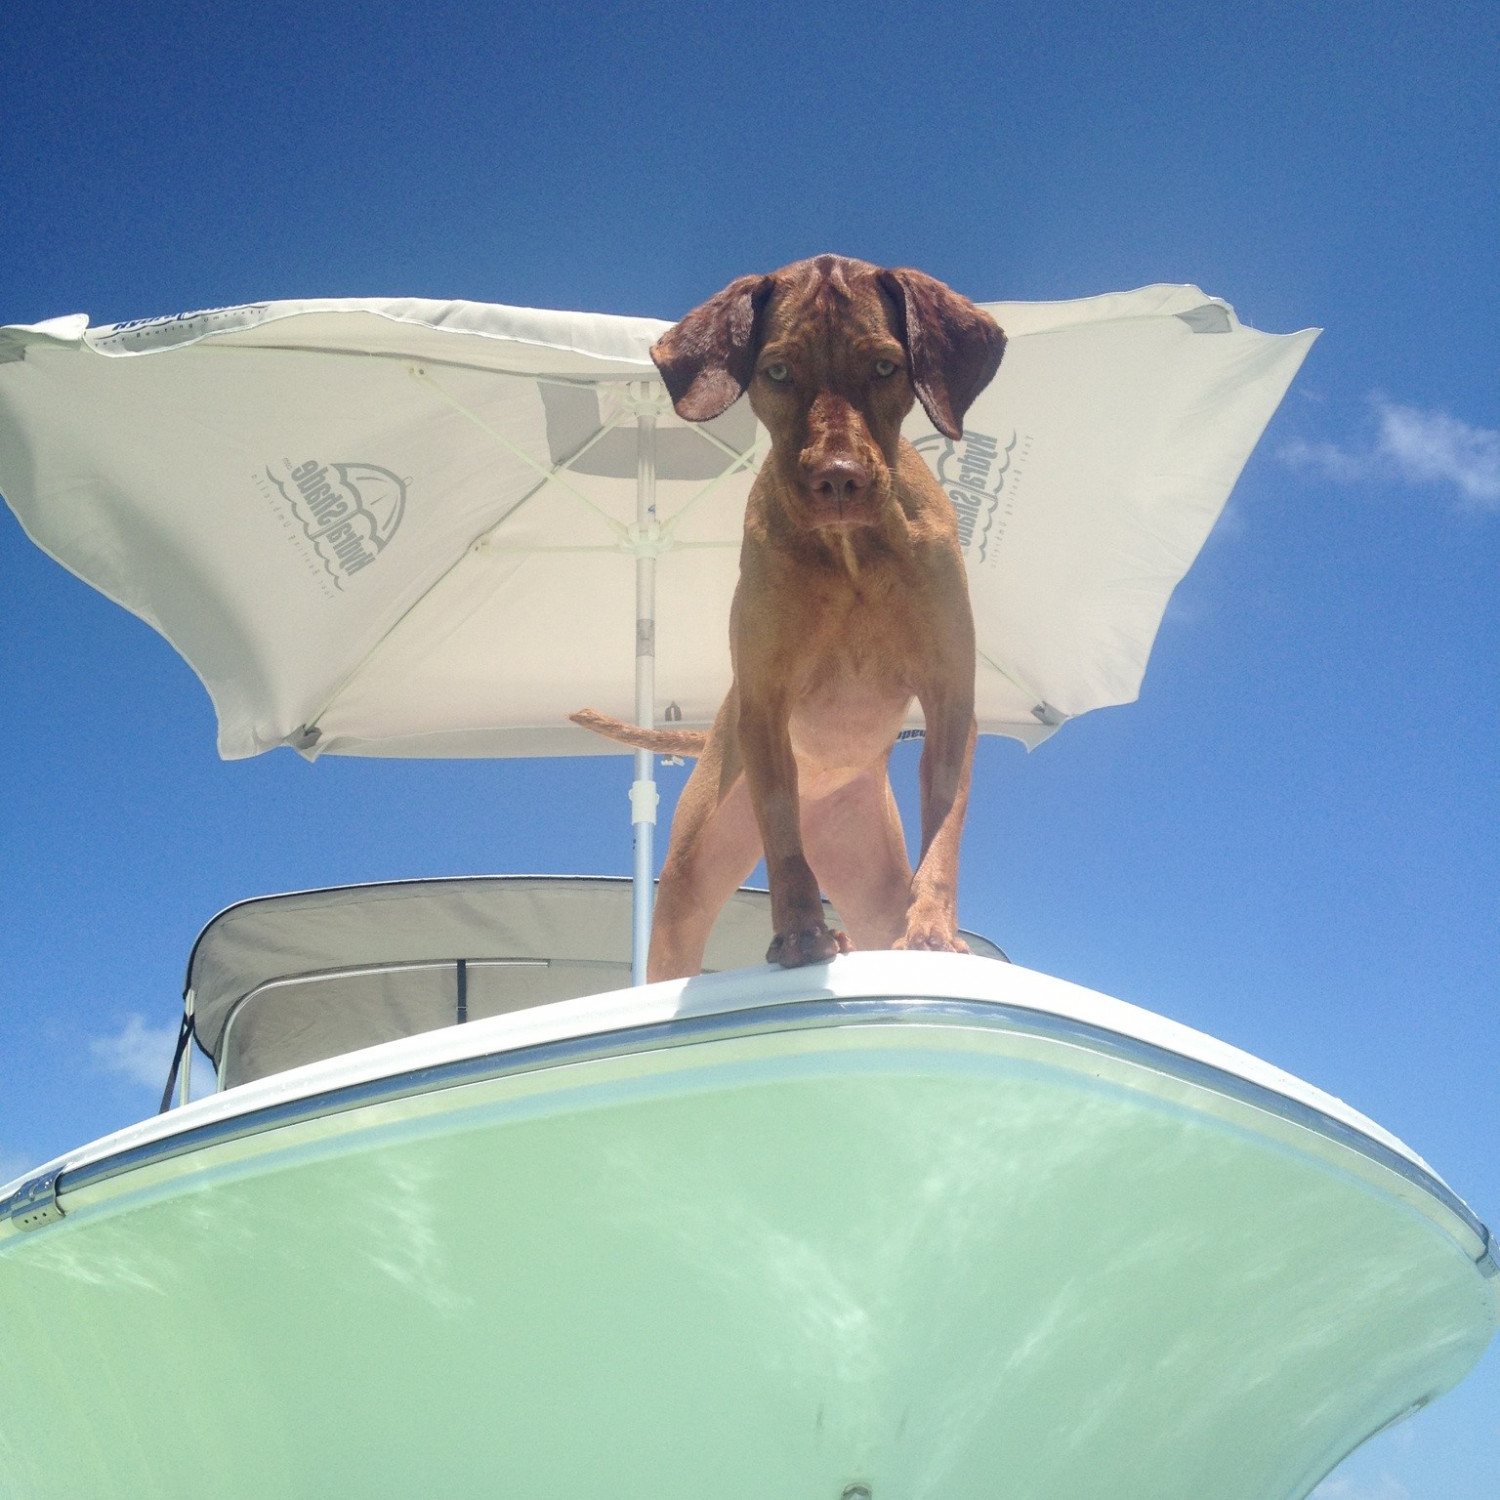 I think our dog likes this boat and going to the sand bar in it as much as we do.